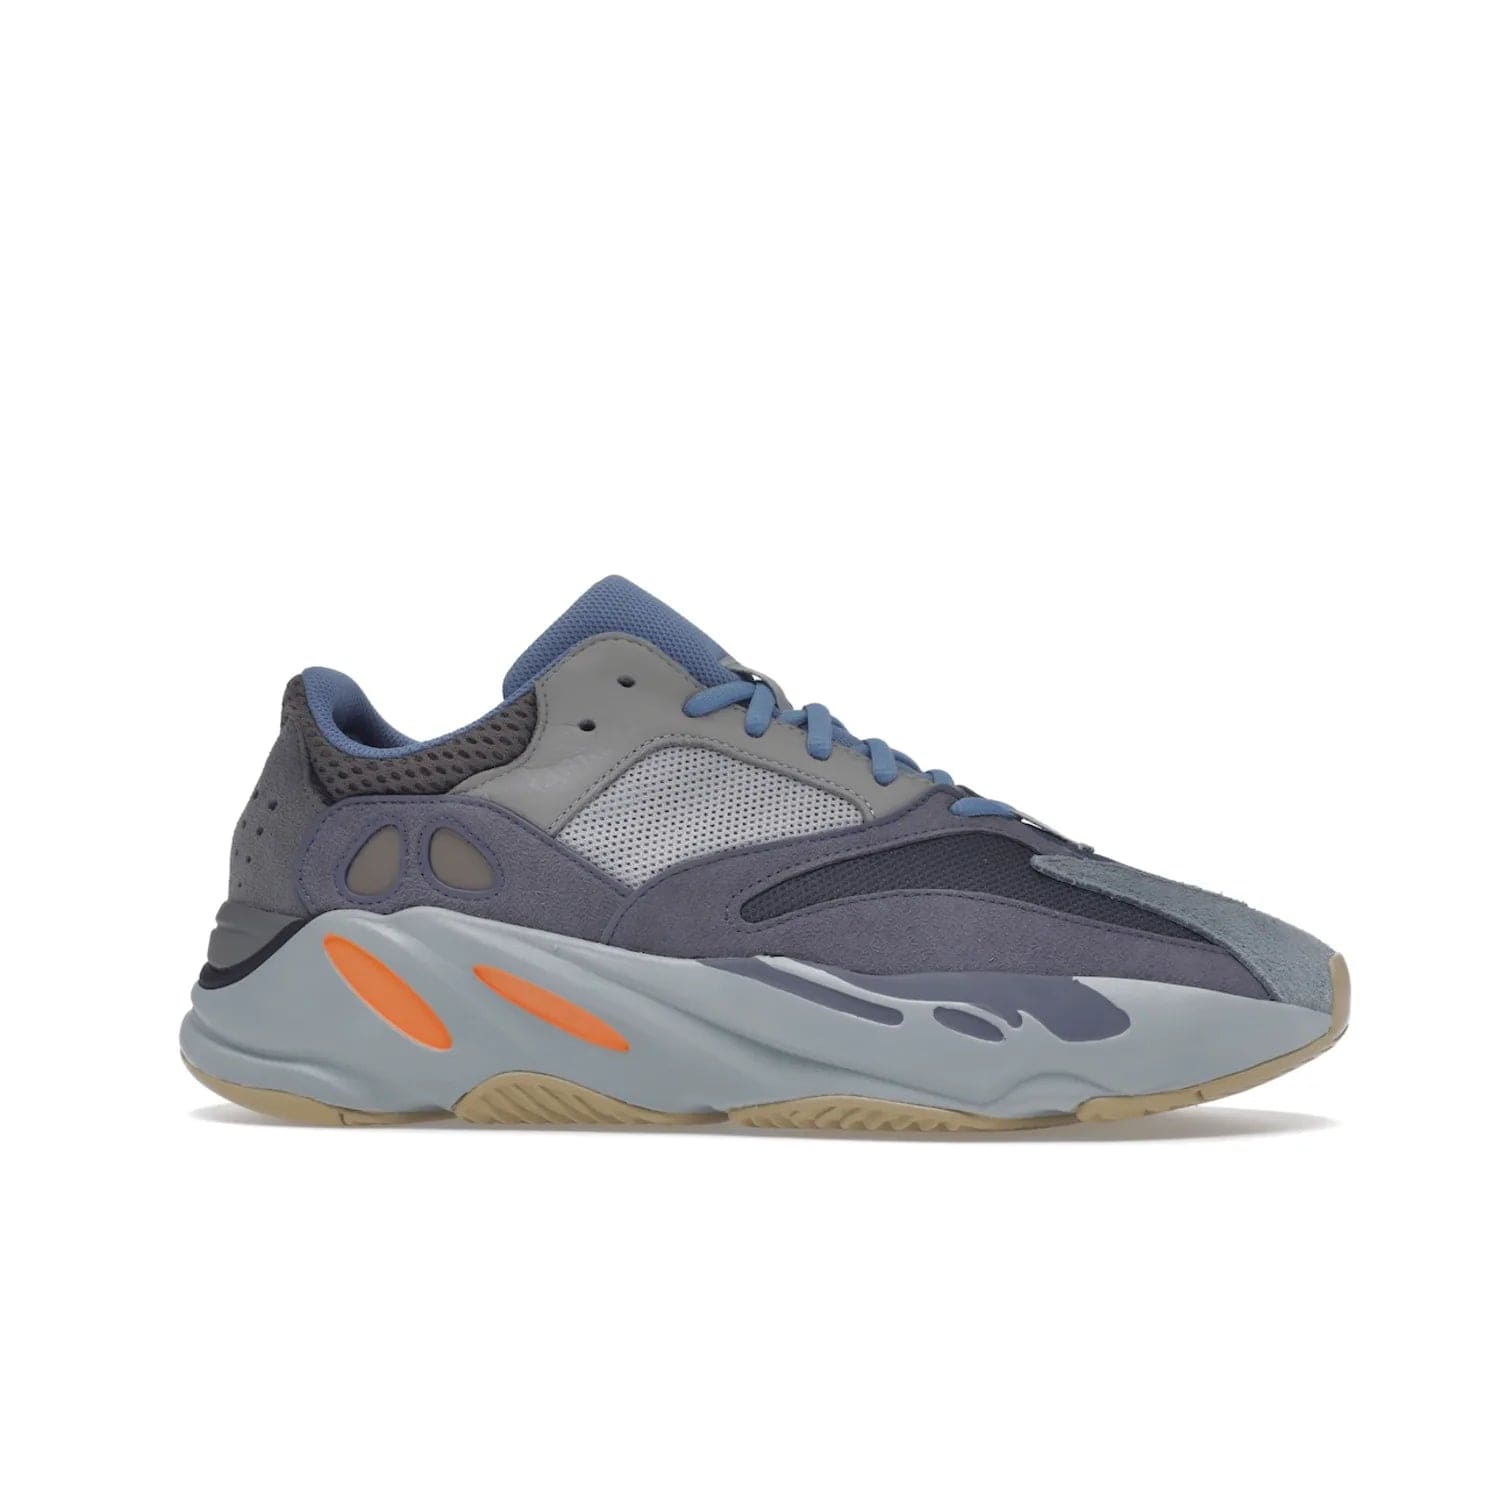 adidas Yeezy Boost 700 Carbon Blue - Image 2 - Only at www.BallersClubKickz.com - Style meets practicality with the adidas Yeezy Boost 700 Carbon Blue. Tonal grey and carbon blue mix of suede and mesh upper, grey midsole and gum outsole. Get yours today.